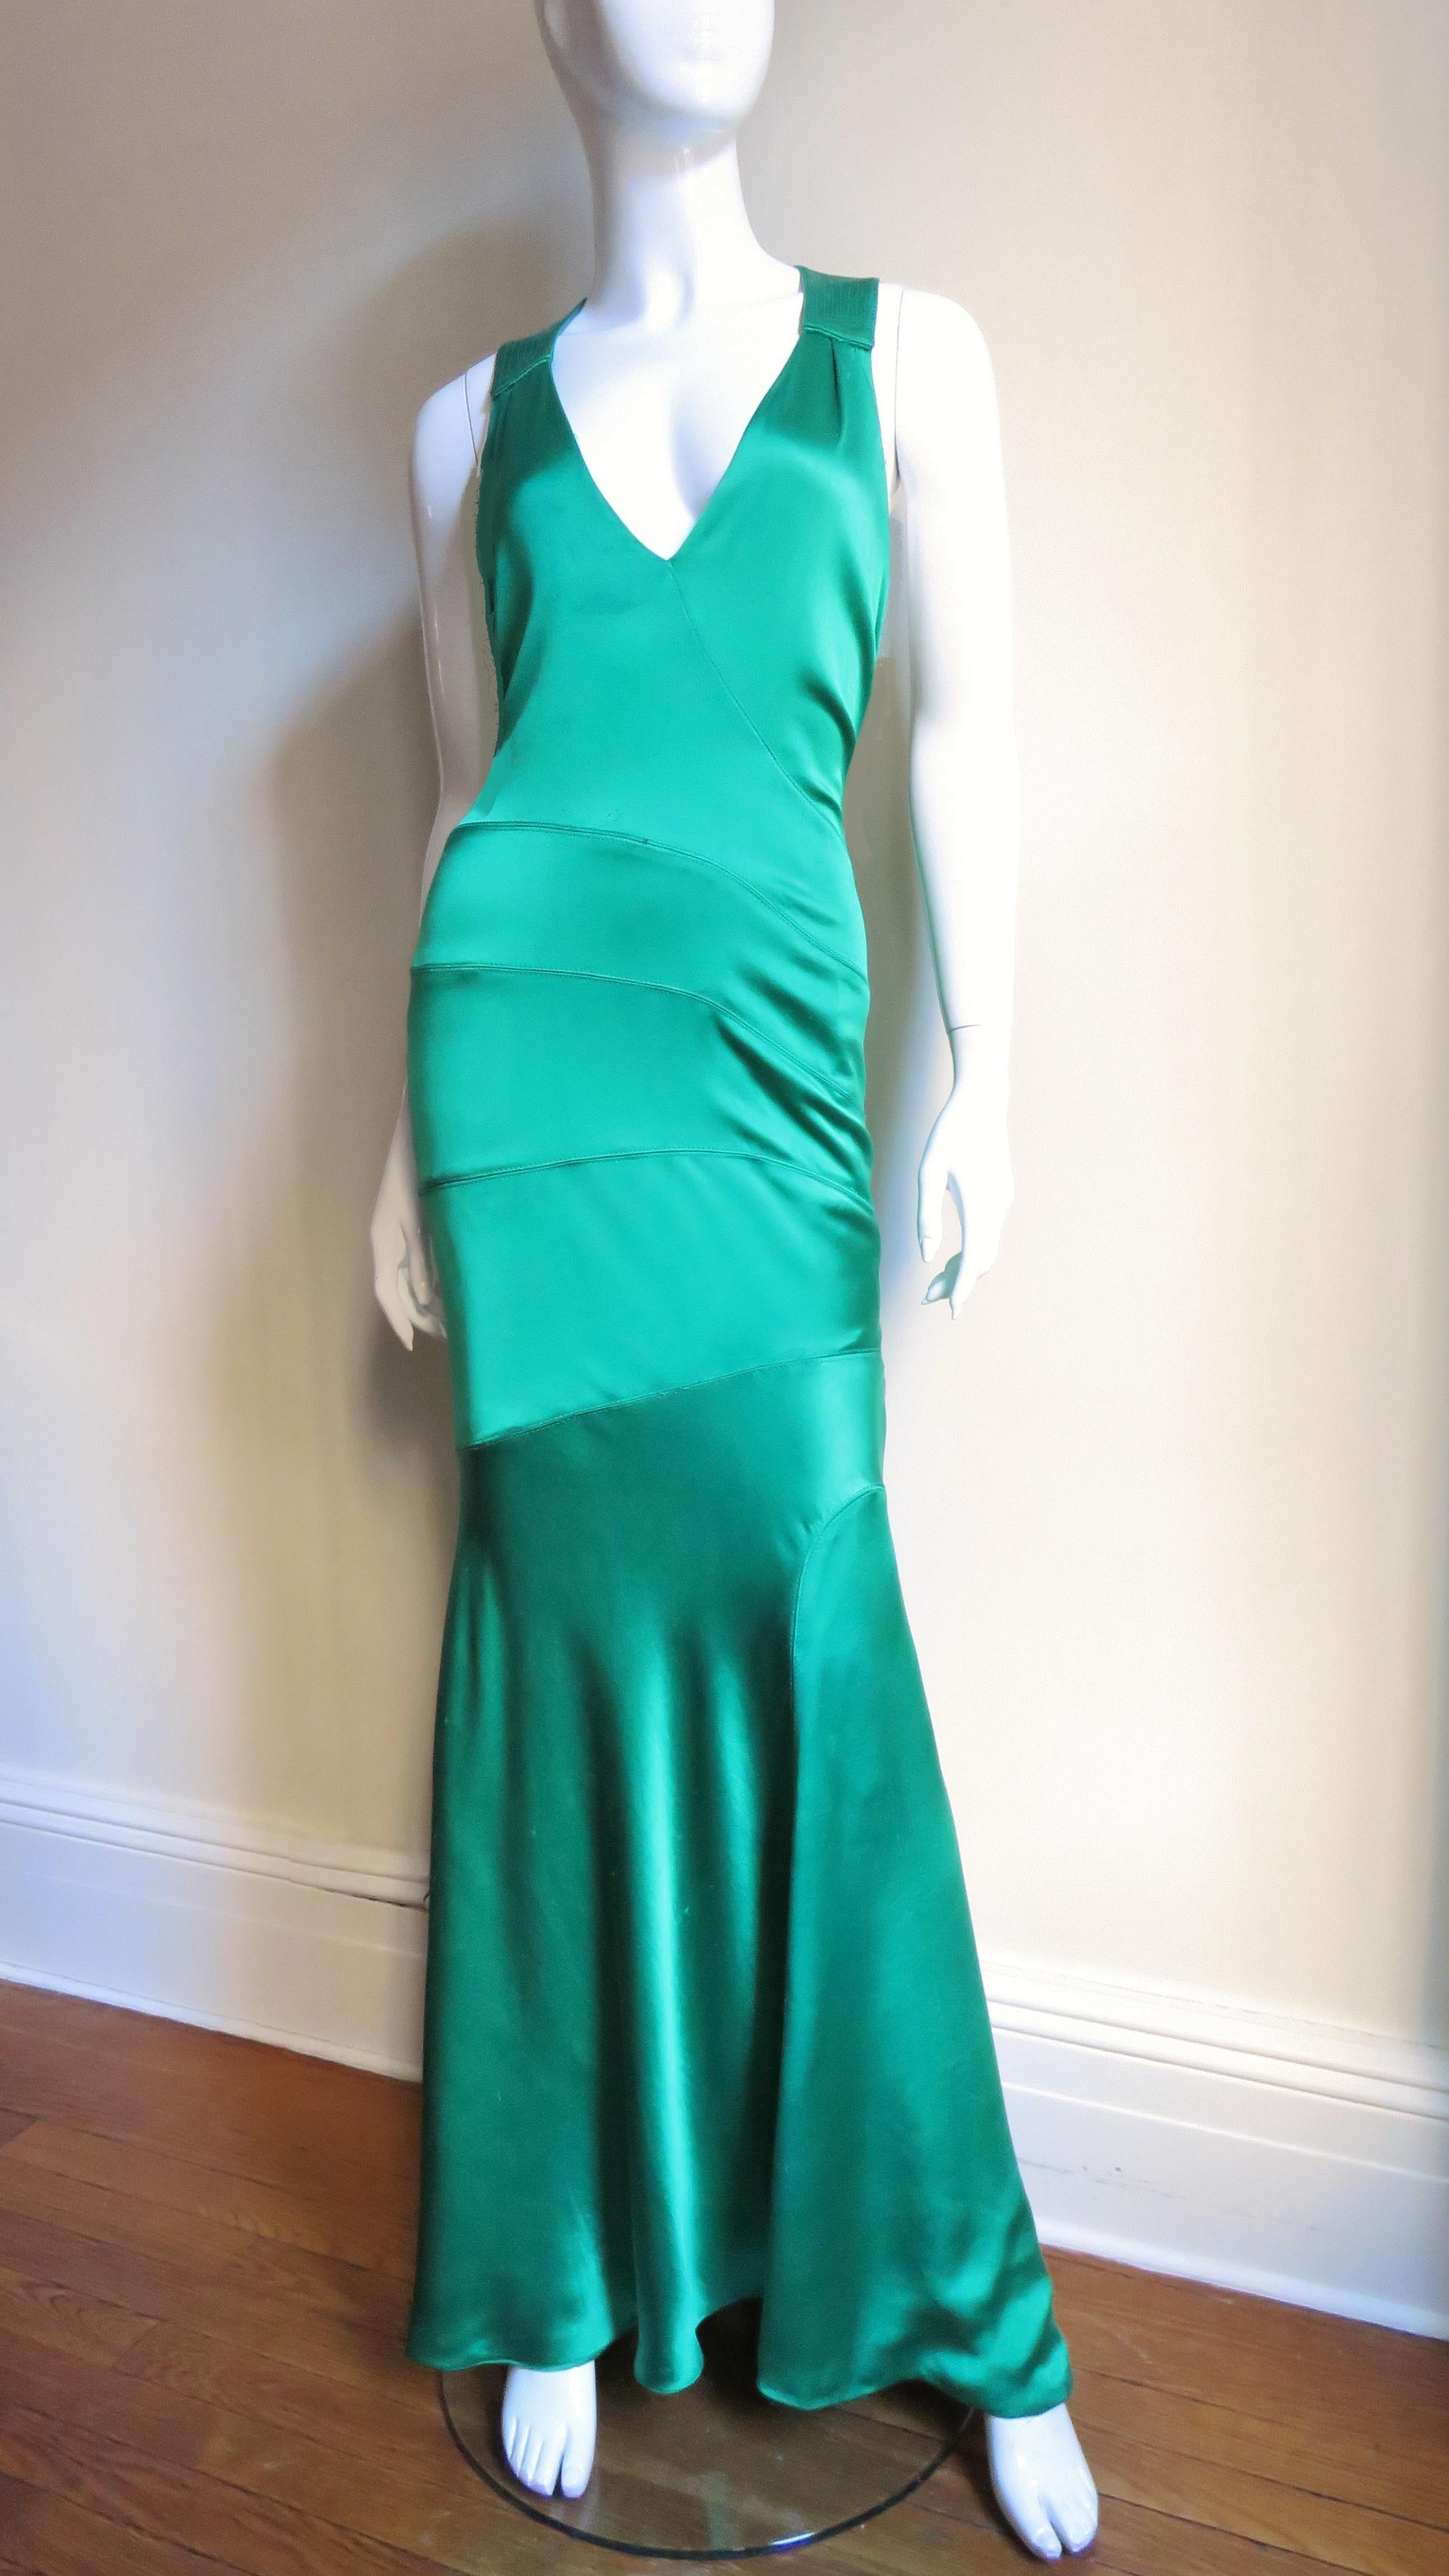 This is stunning- a gorgeous emerald green silk charmeuse gown from Gianni Versace Couture created in the glamorous style reminiscent of Hollywood days gone by.  It is fitted through the body with seaming in angles across the front, has a plunging